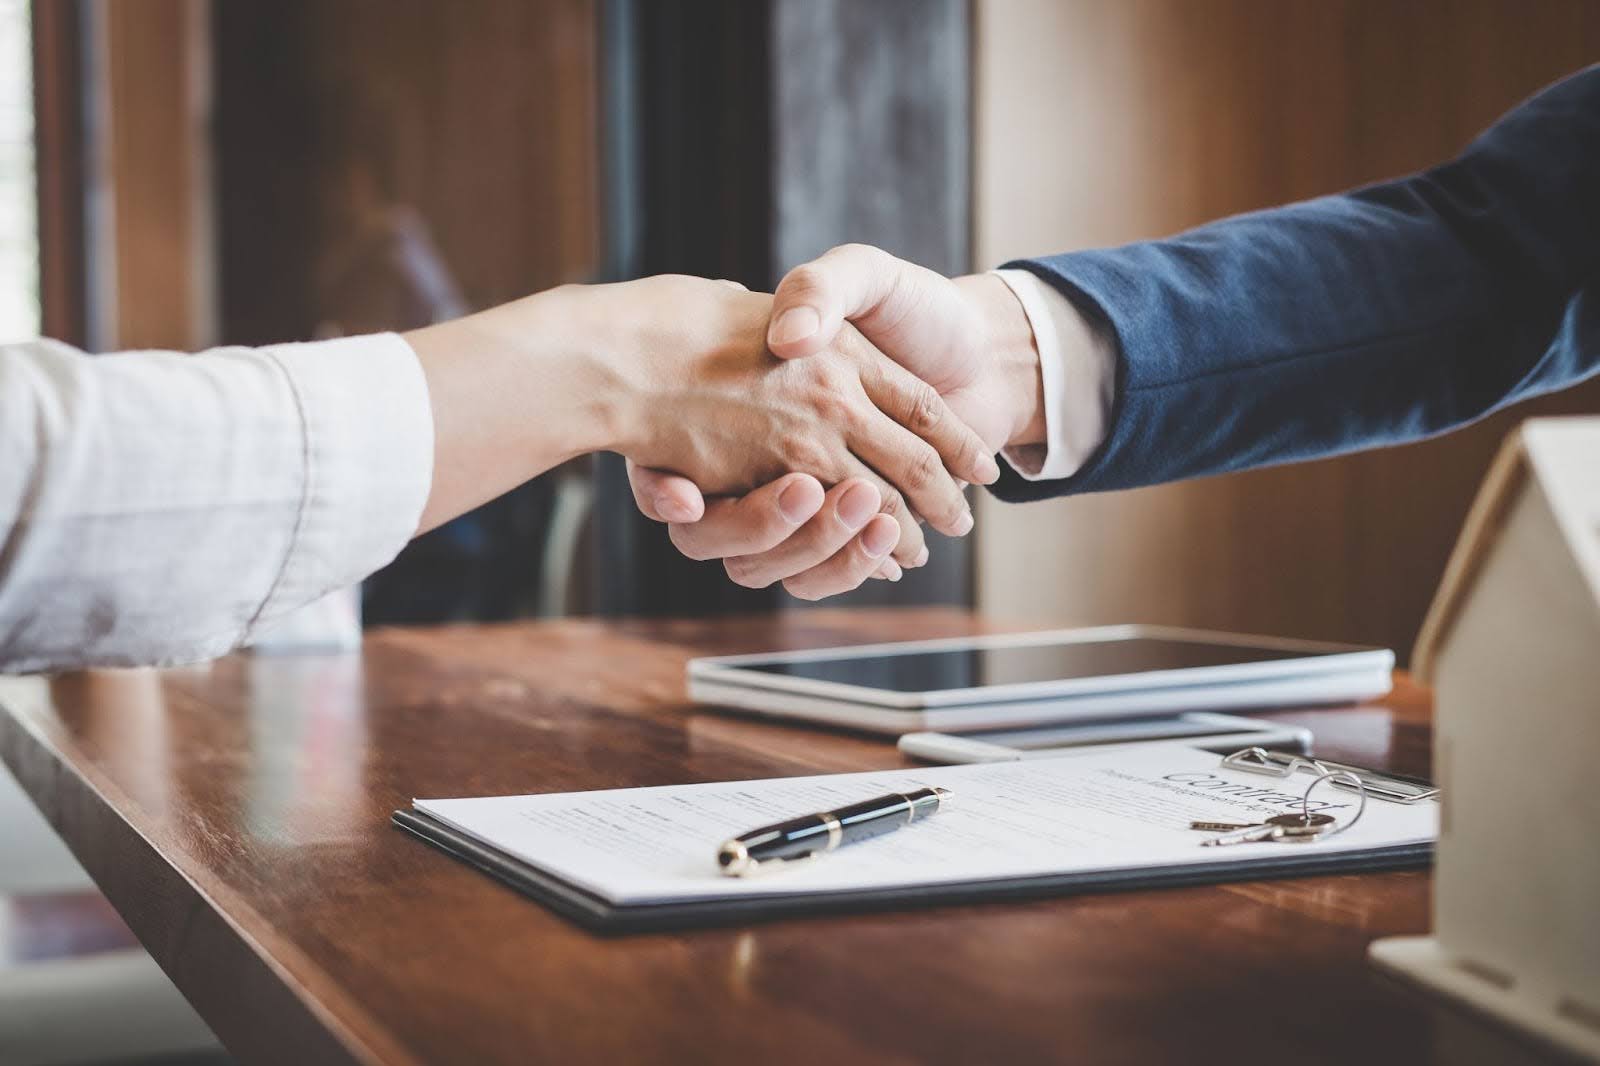 Person shaking hands after receiving Commercial Bridge Loan.